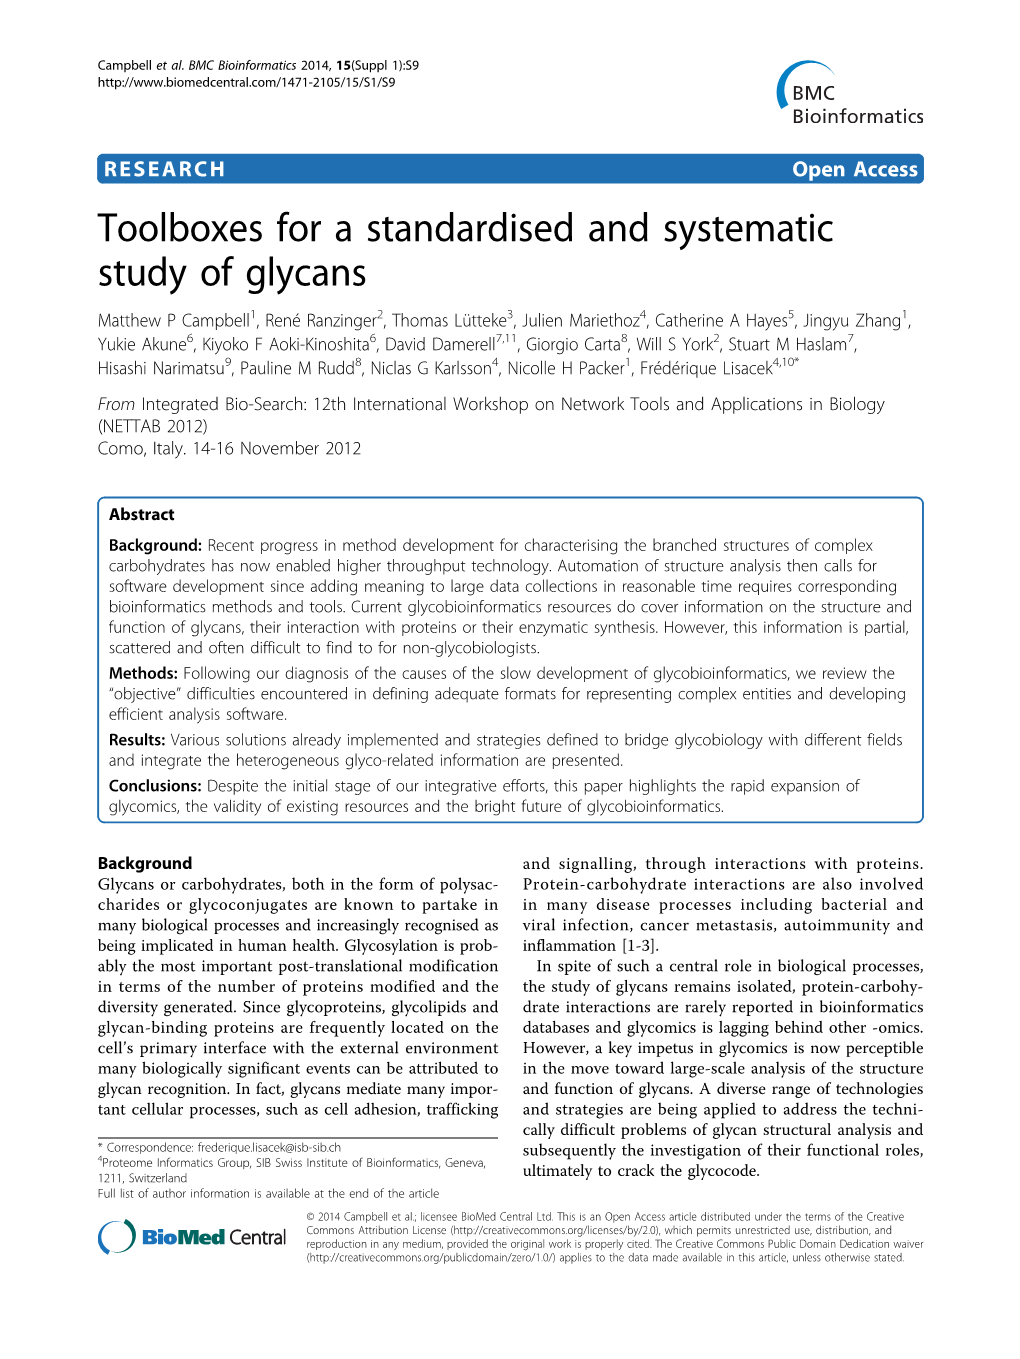 Toolboxes for a Standardised and Systematic Study of Glycans